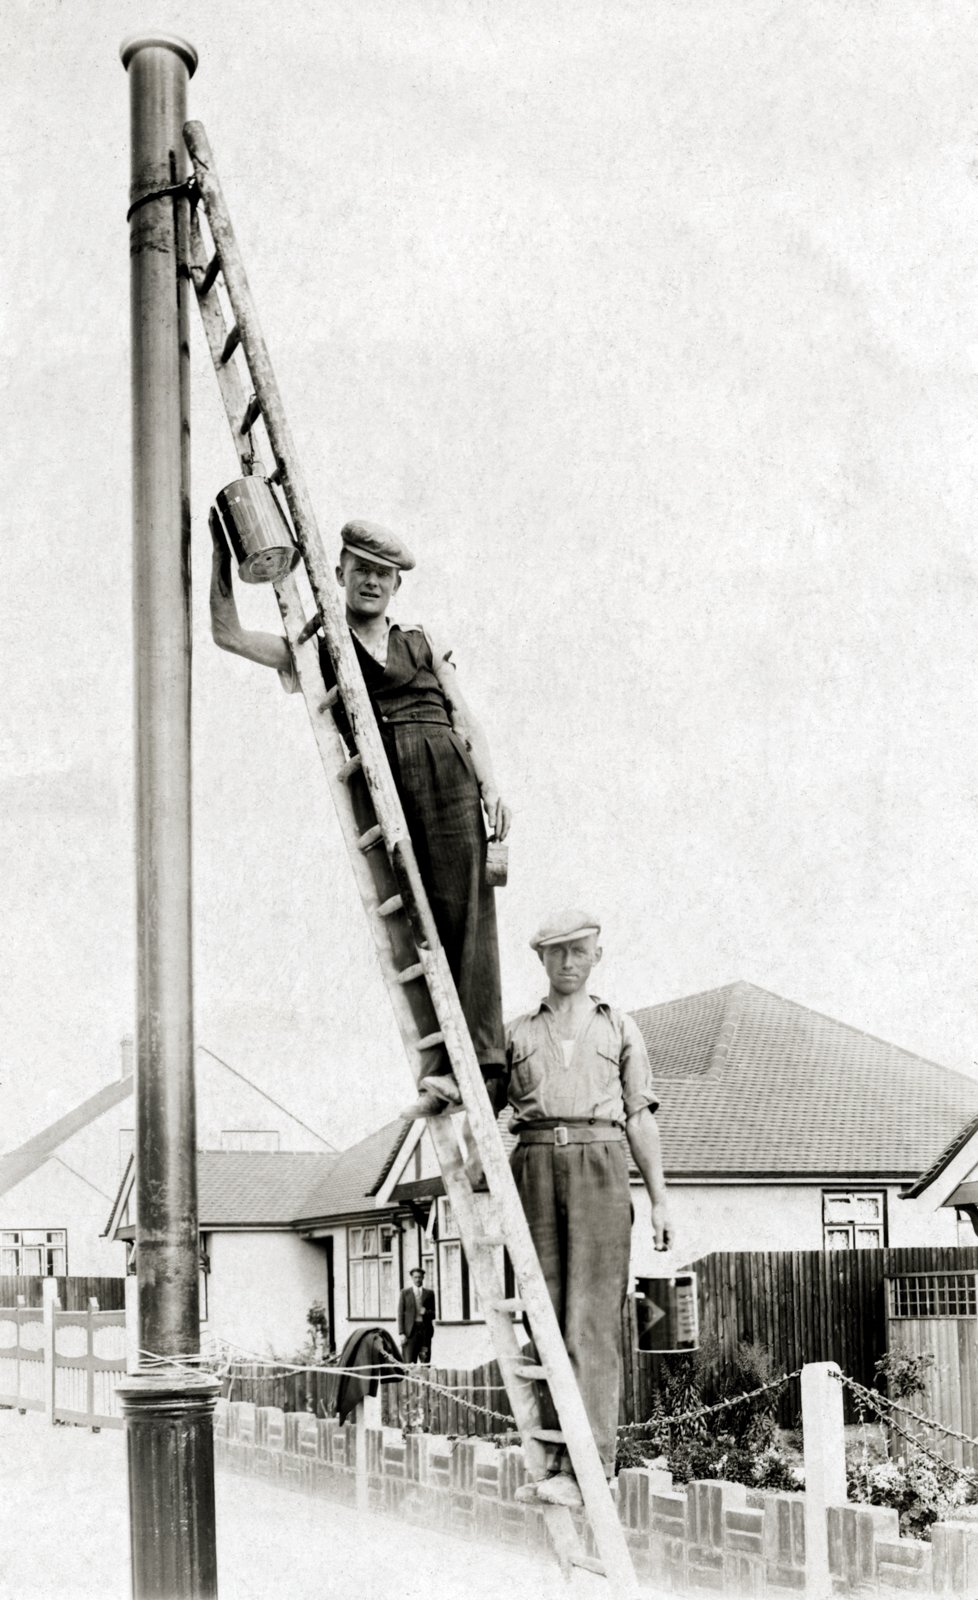 Johnny Murphy (left), a native of Kenmare, County Kerry and Austin McGing (right), a native of Tourmakeady, County Mayo, at work painting a lamppost, London c.1936.